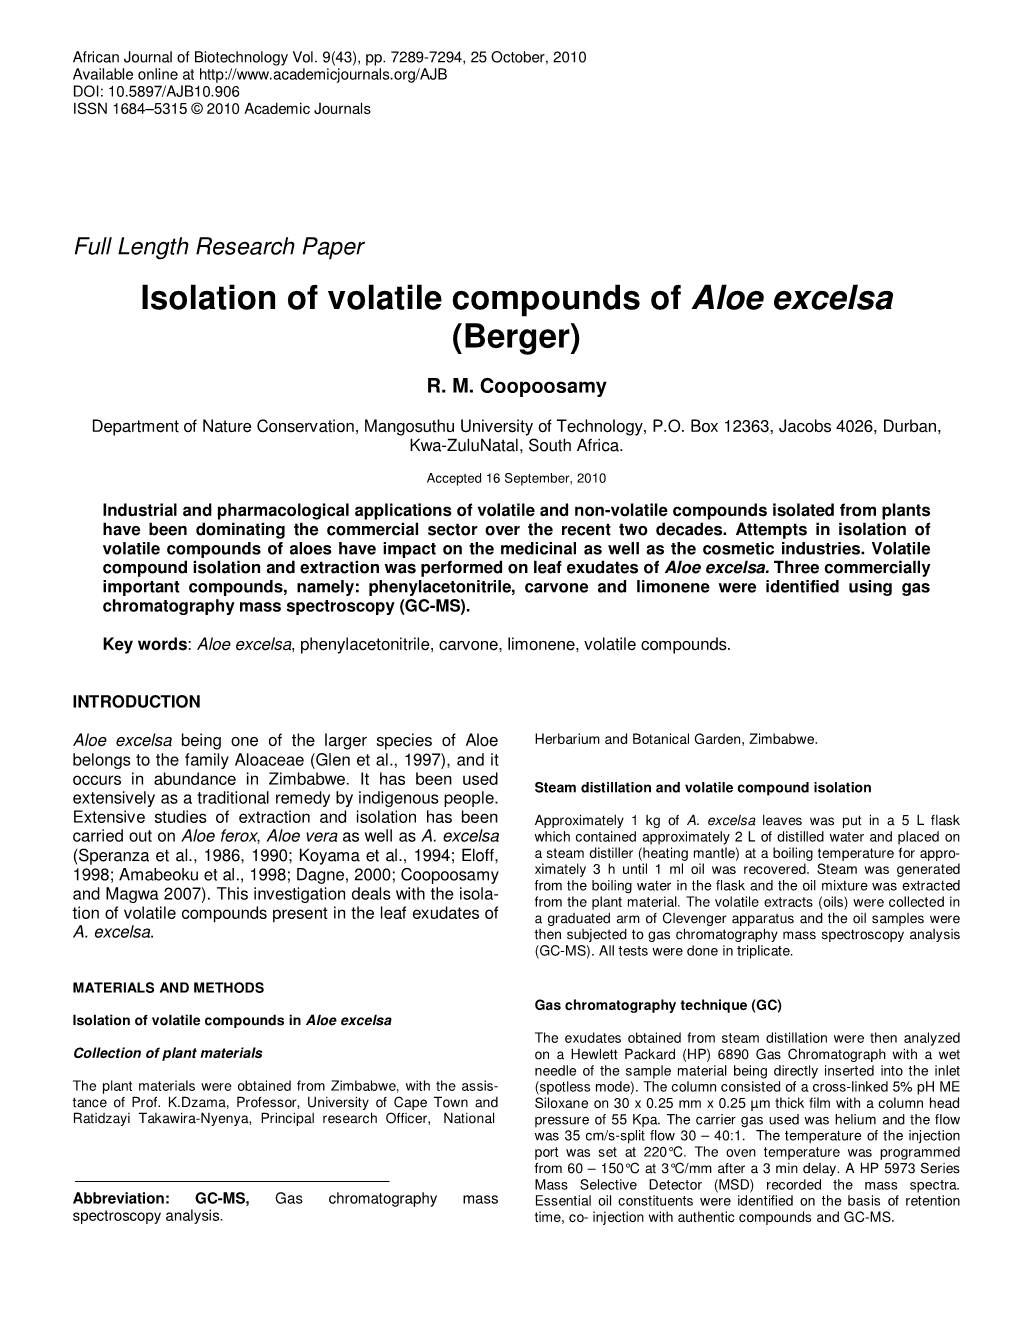 Isolation of Volatile Compounds of Aloe Excelsa (Berger)